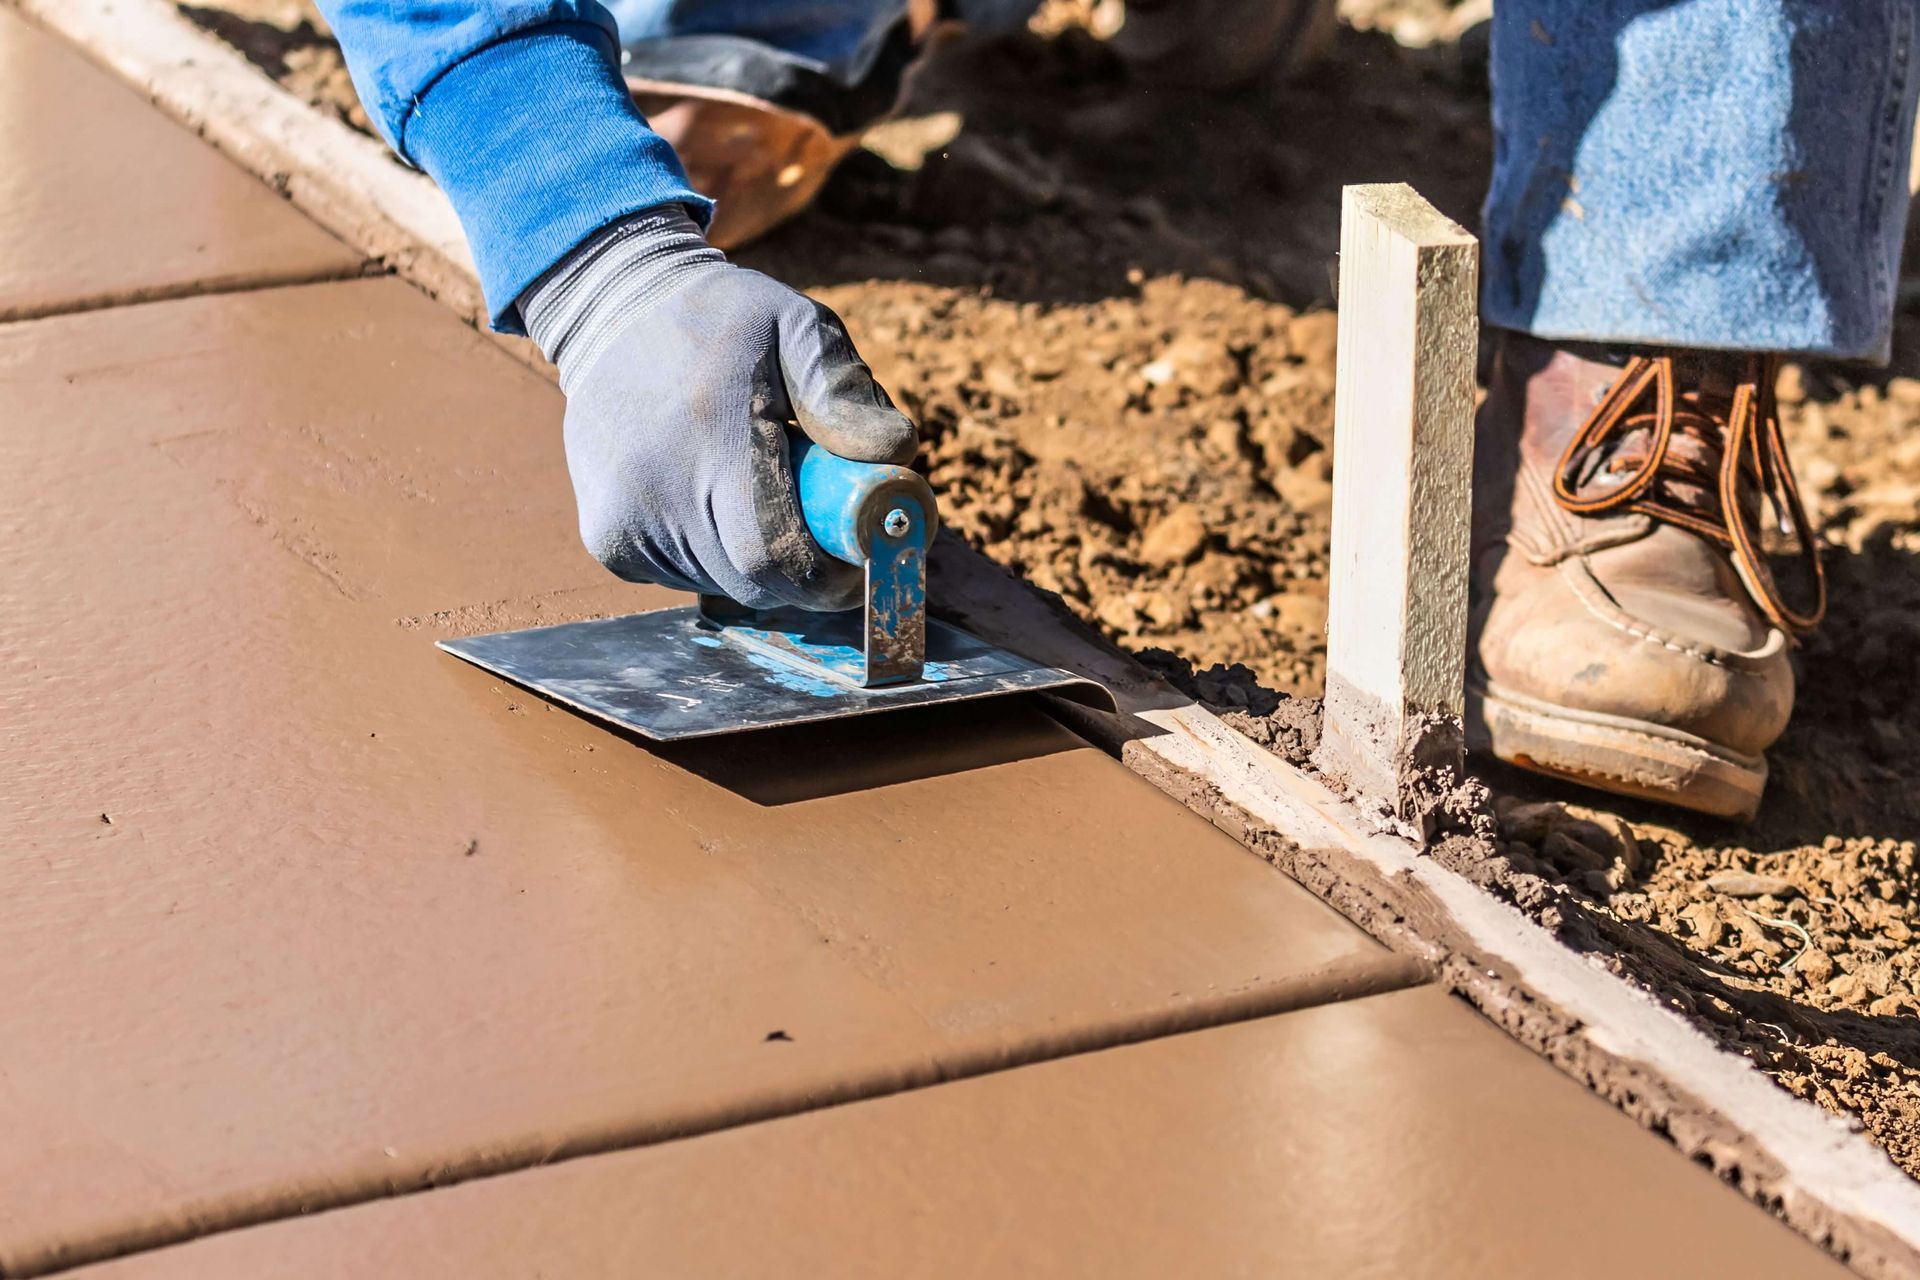 concrete contractor laying down concrete, shaping concrete with tools, concrete contractors conway ar, concrete driveways, stamped concrete, concrete services in conway arkansas